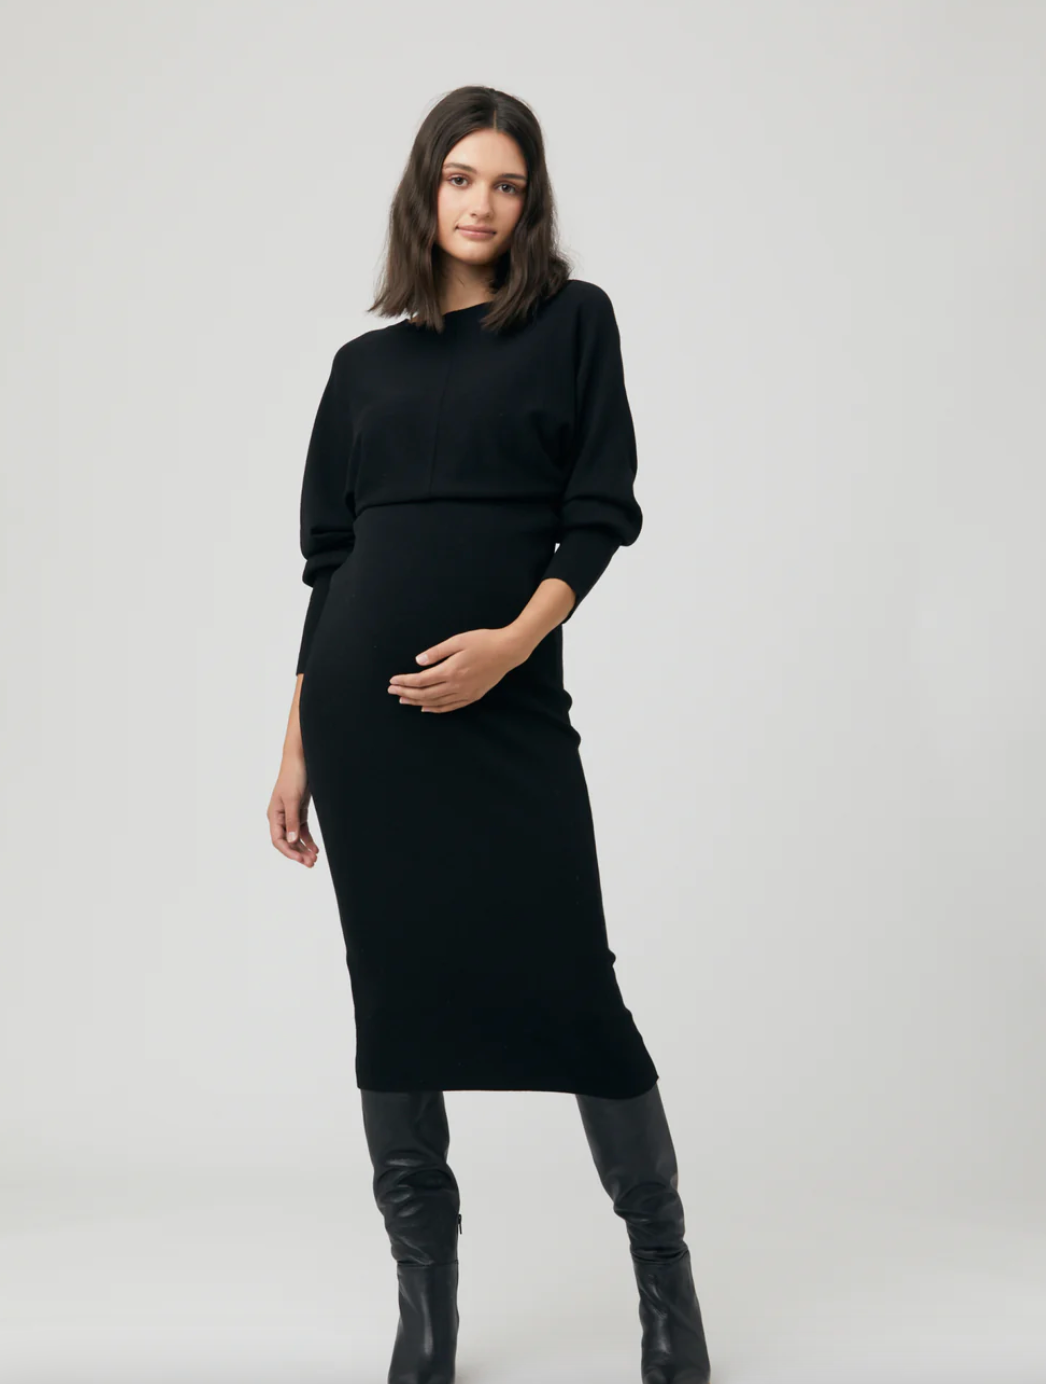 Best Maternity Clothes 2023 - Forbes Vetted